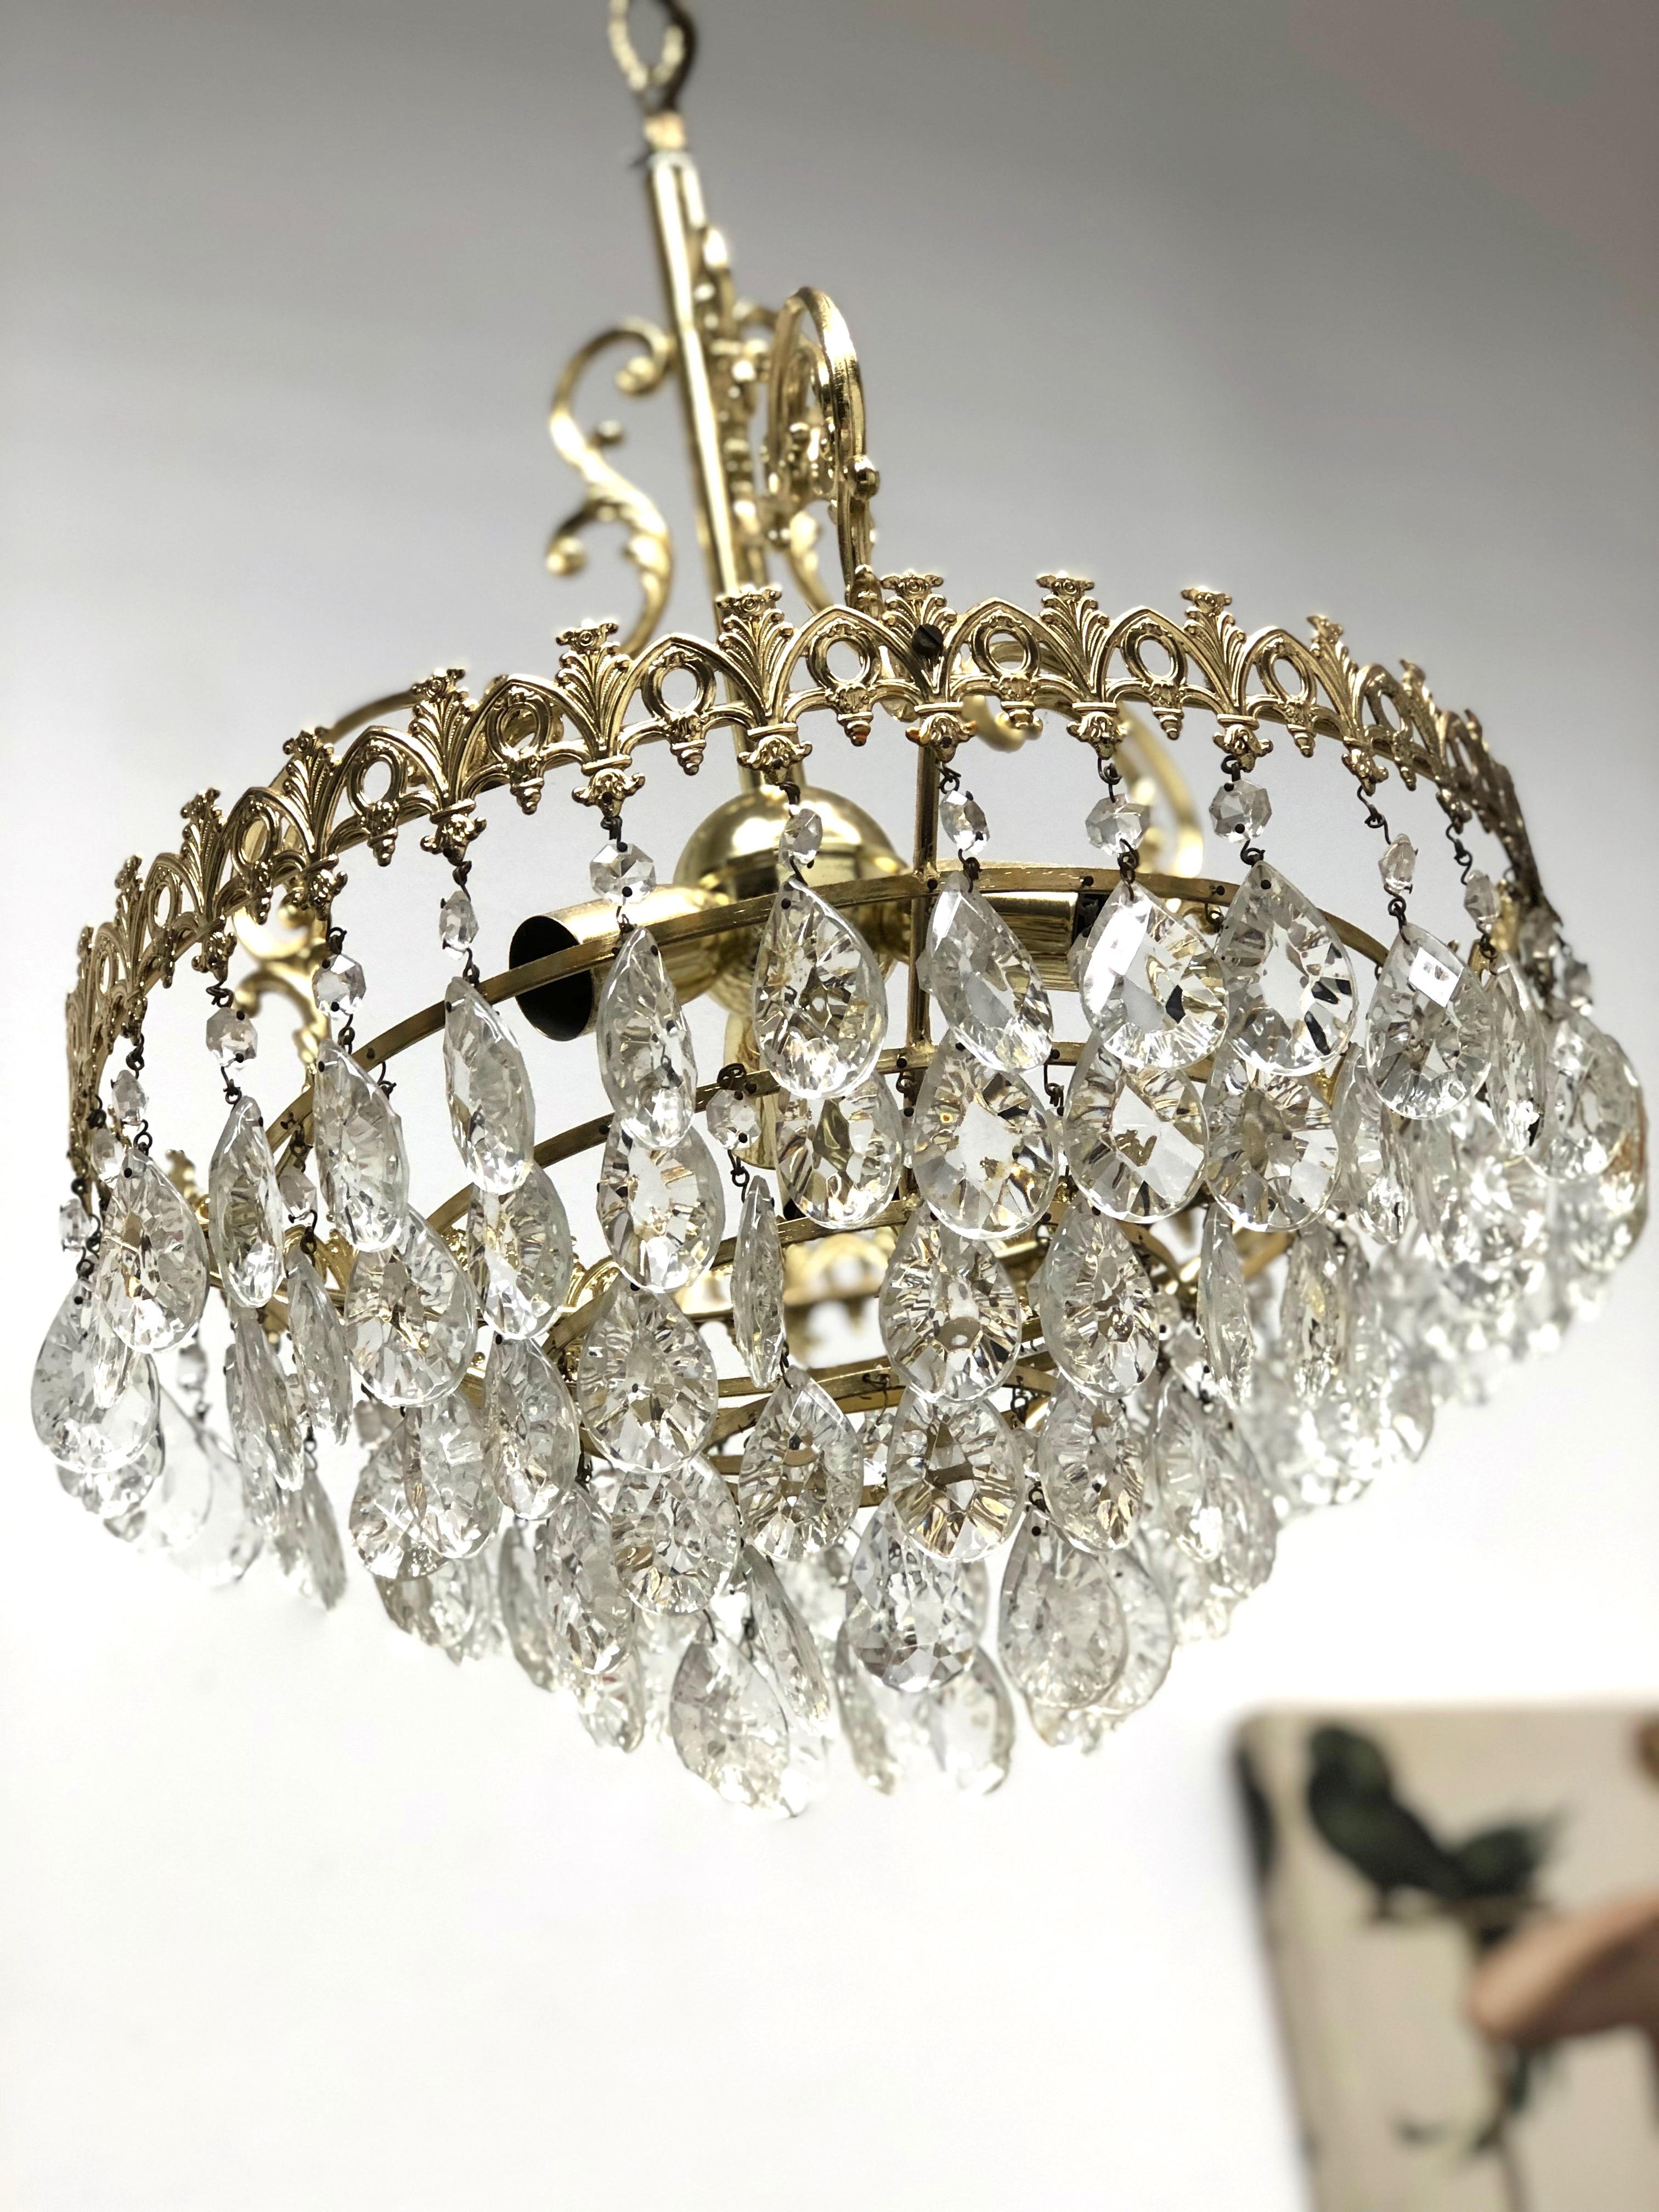 Brass and Crystal Glass Hollywood Regency Style Chandelier, Germany, 1960s For Sale 4